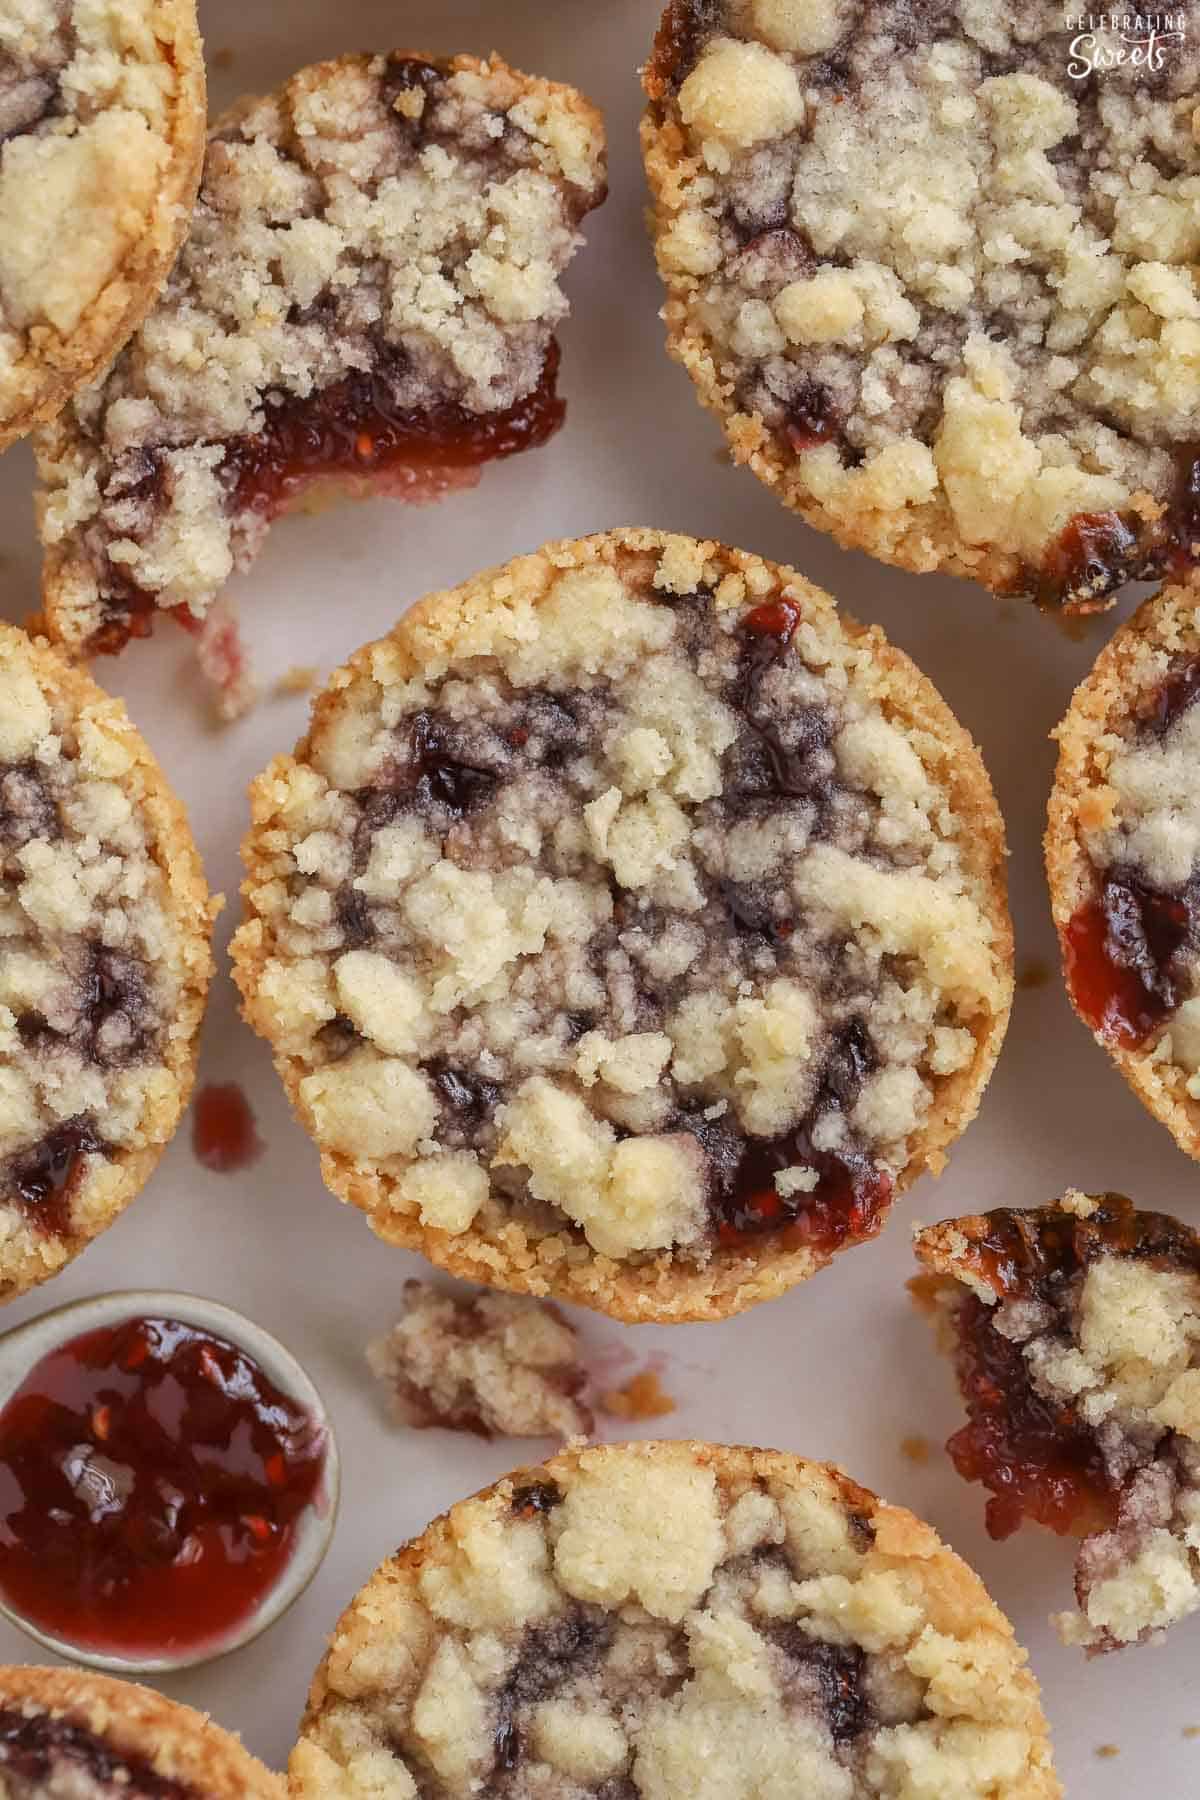 Closeup of a raspberry crumble cookie next to a spoonful of jam.